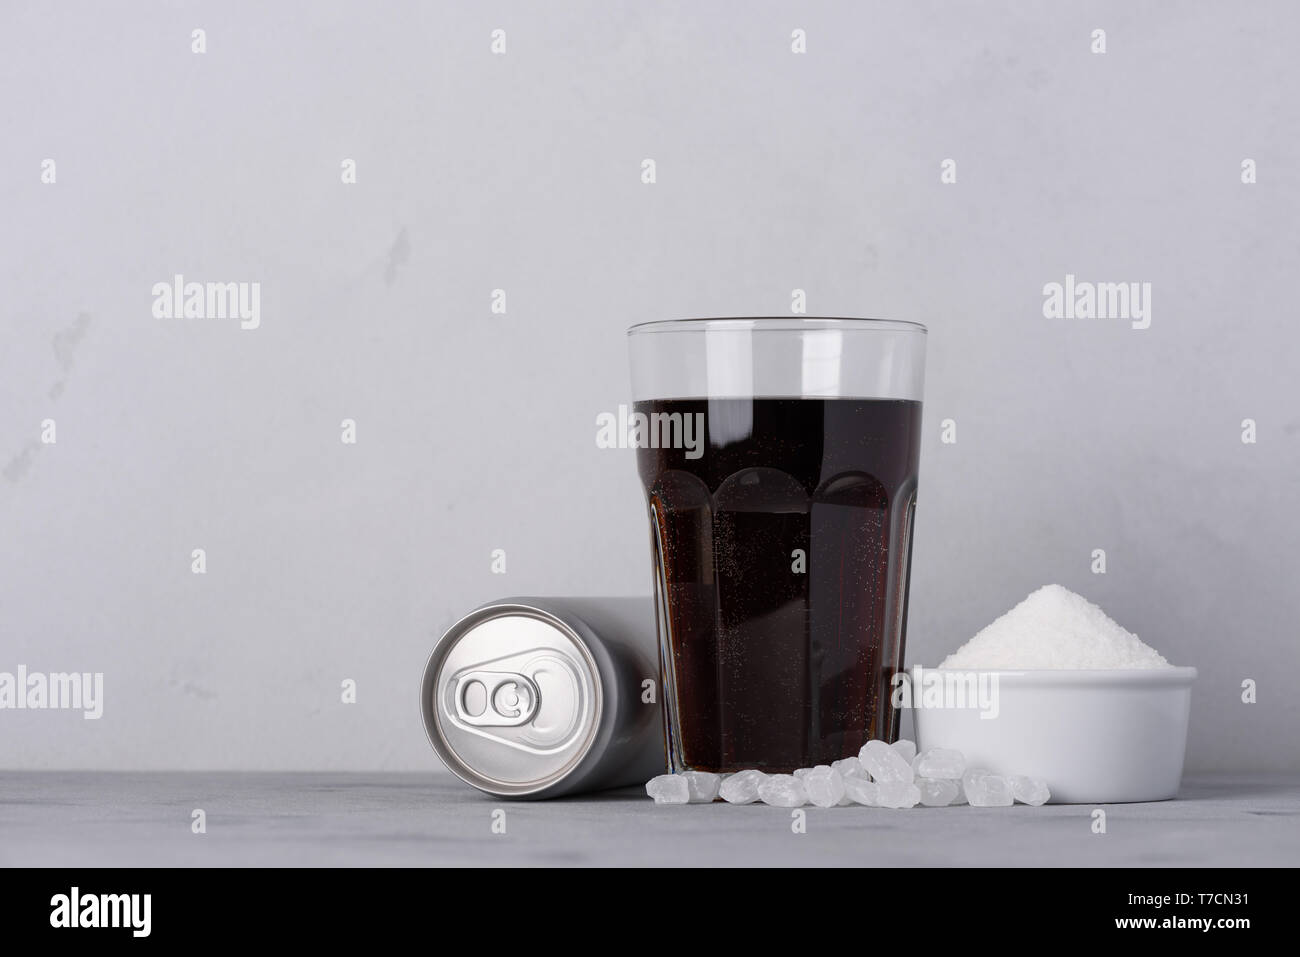 Sugary soft drink.  Diet high sugar content concept. Stock Photo